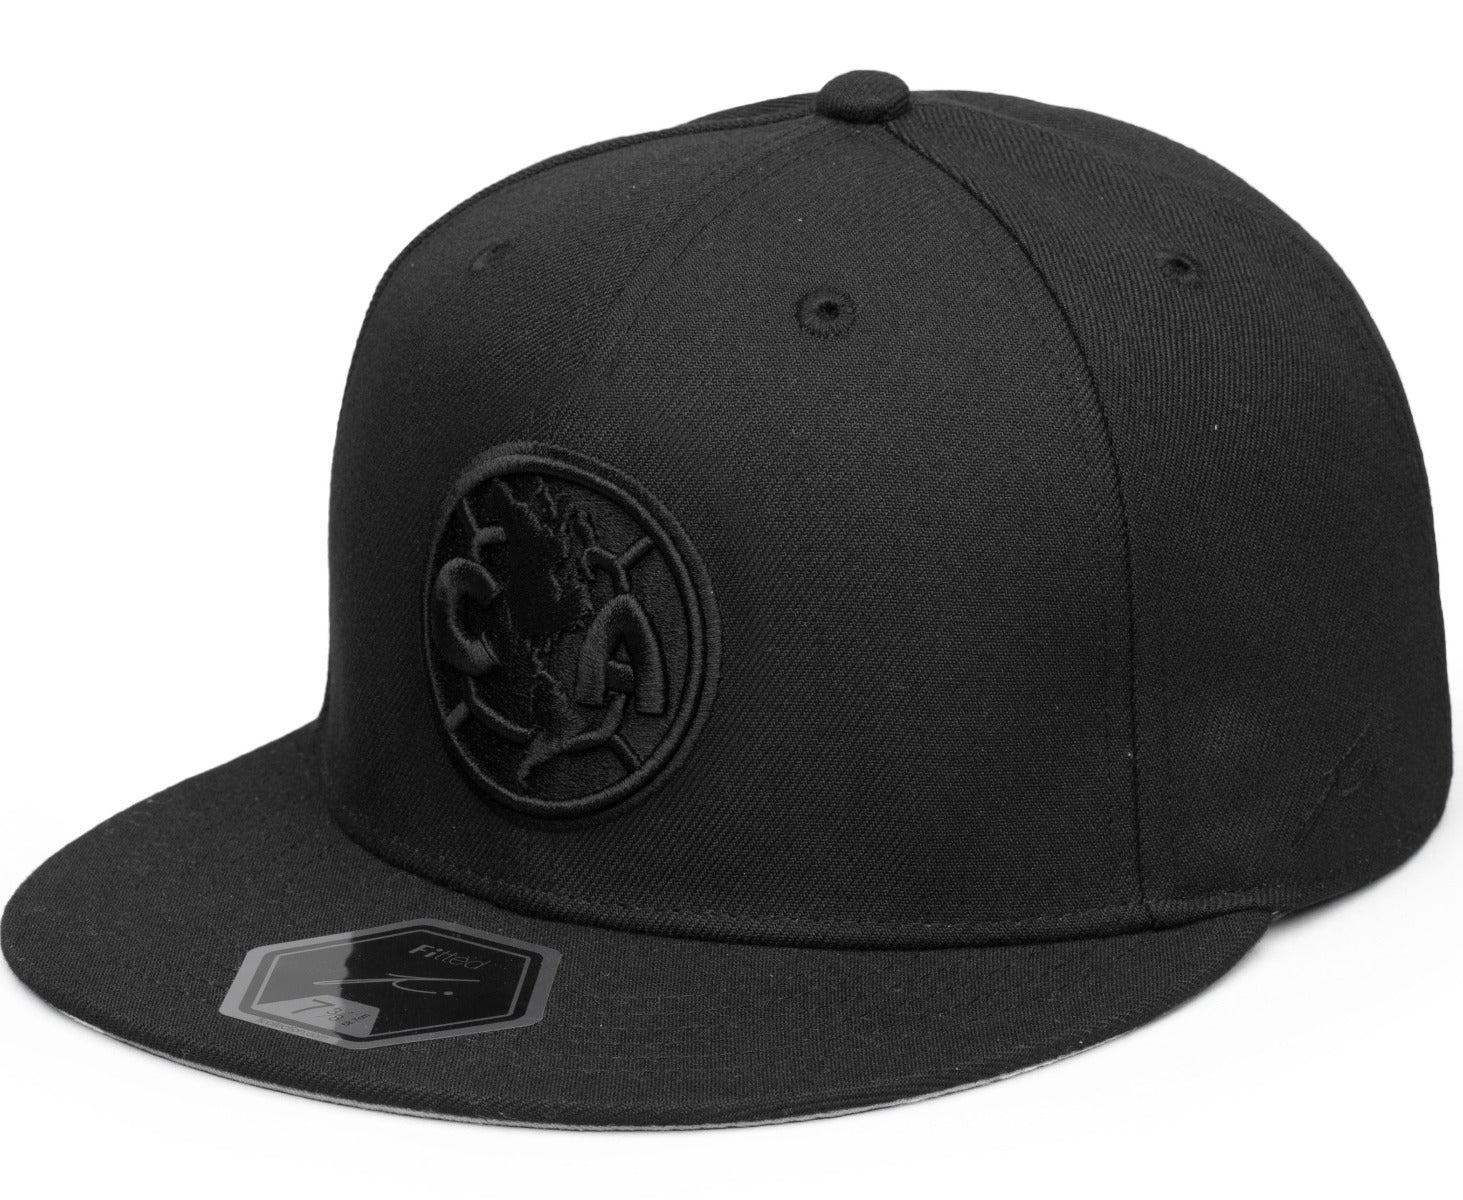 FI COLLECTIONS CLUB AMERICA DUSK FITTED HAT